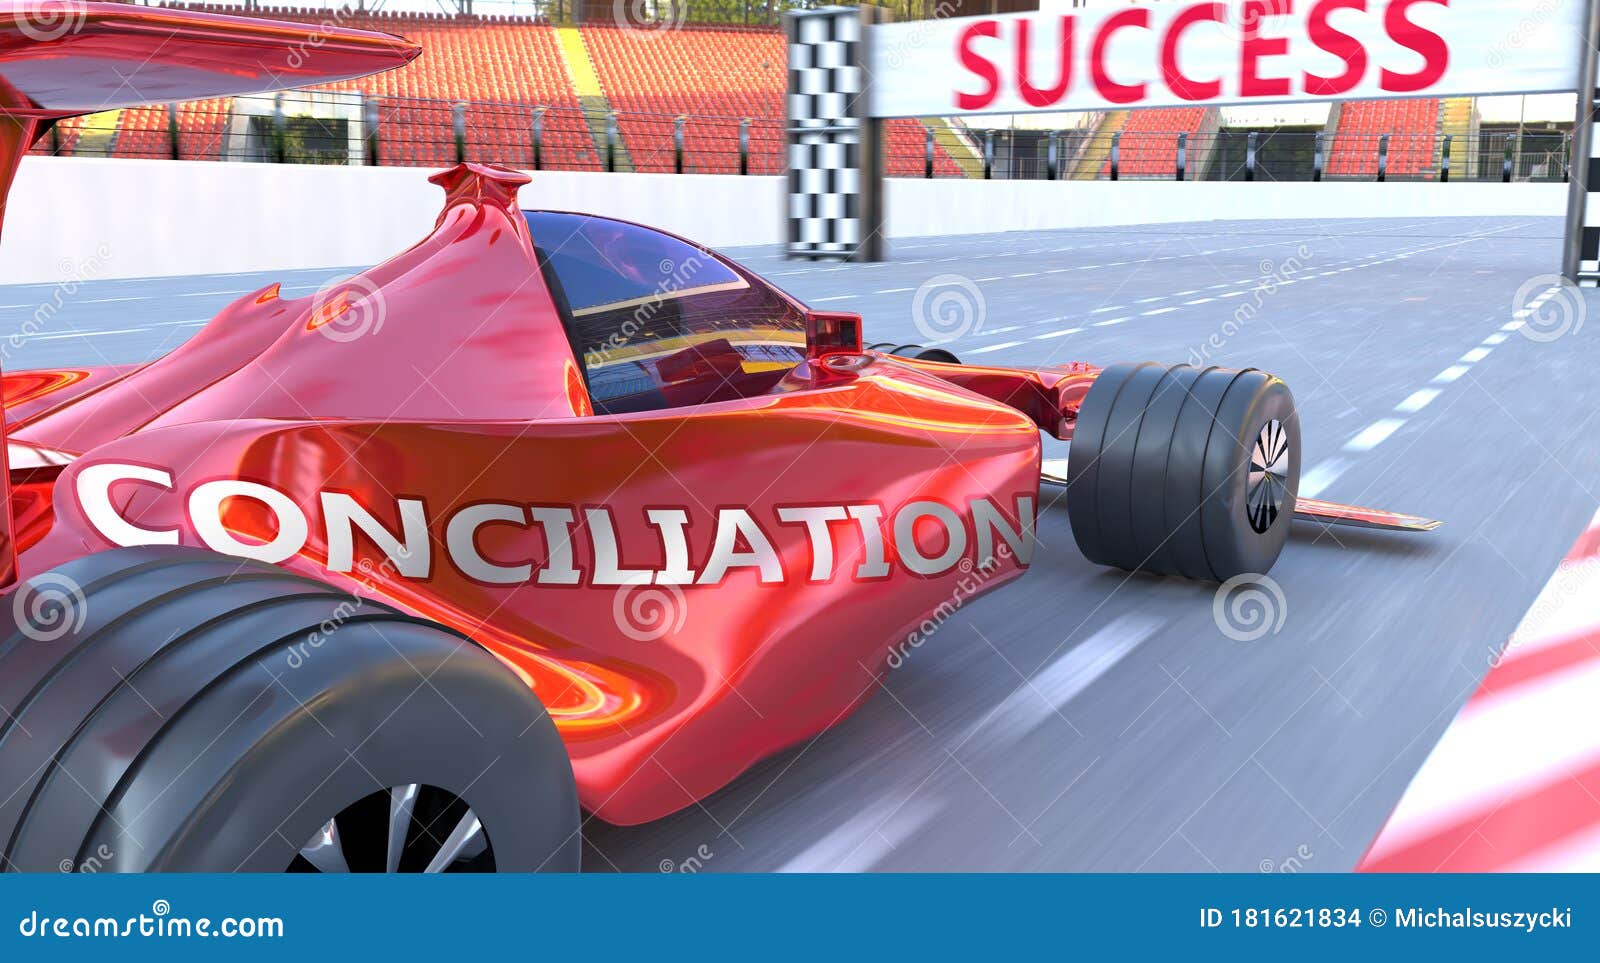 conciliation and success - pictured as word conciliation and a f1 car, to ize that conciliation can help achieving success